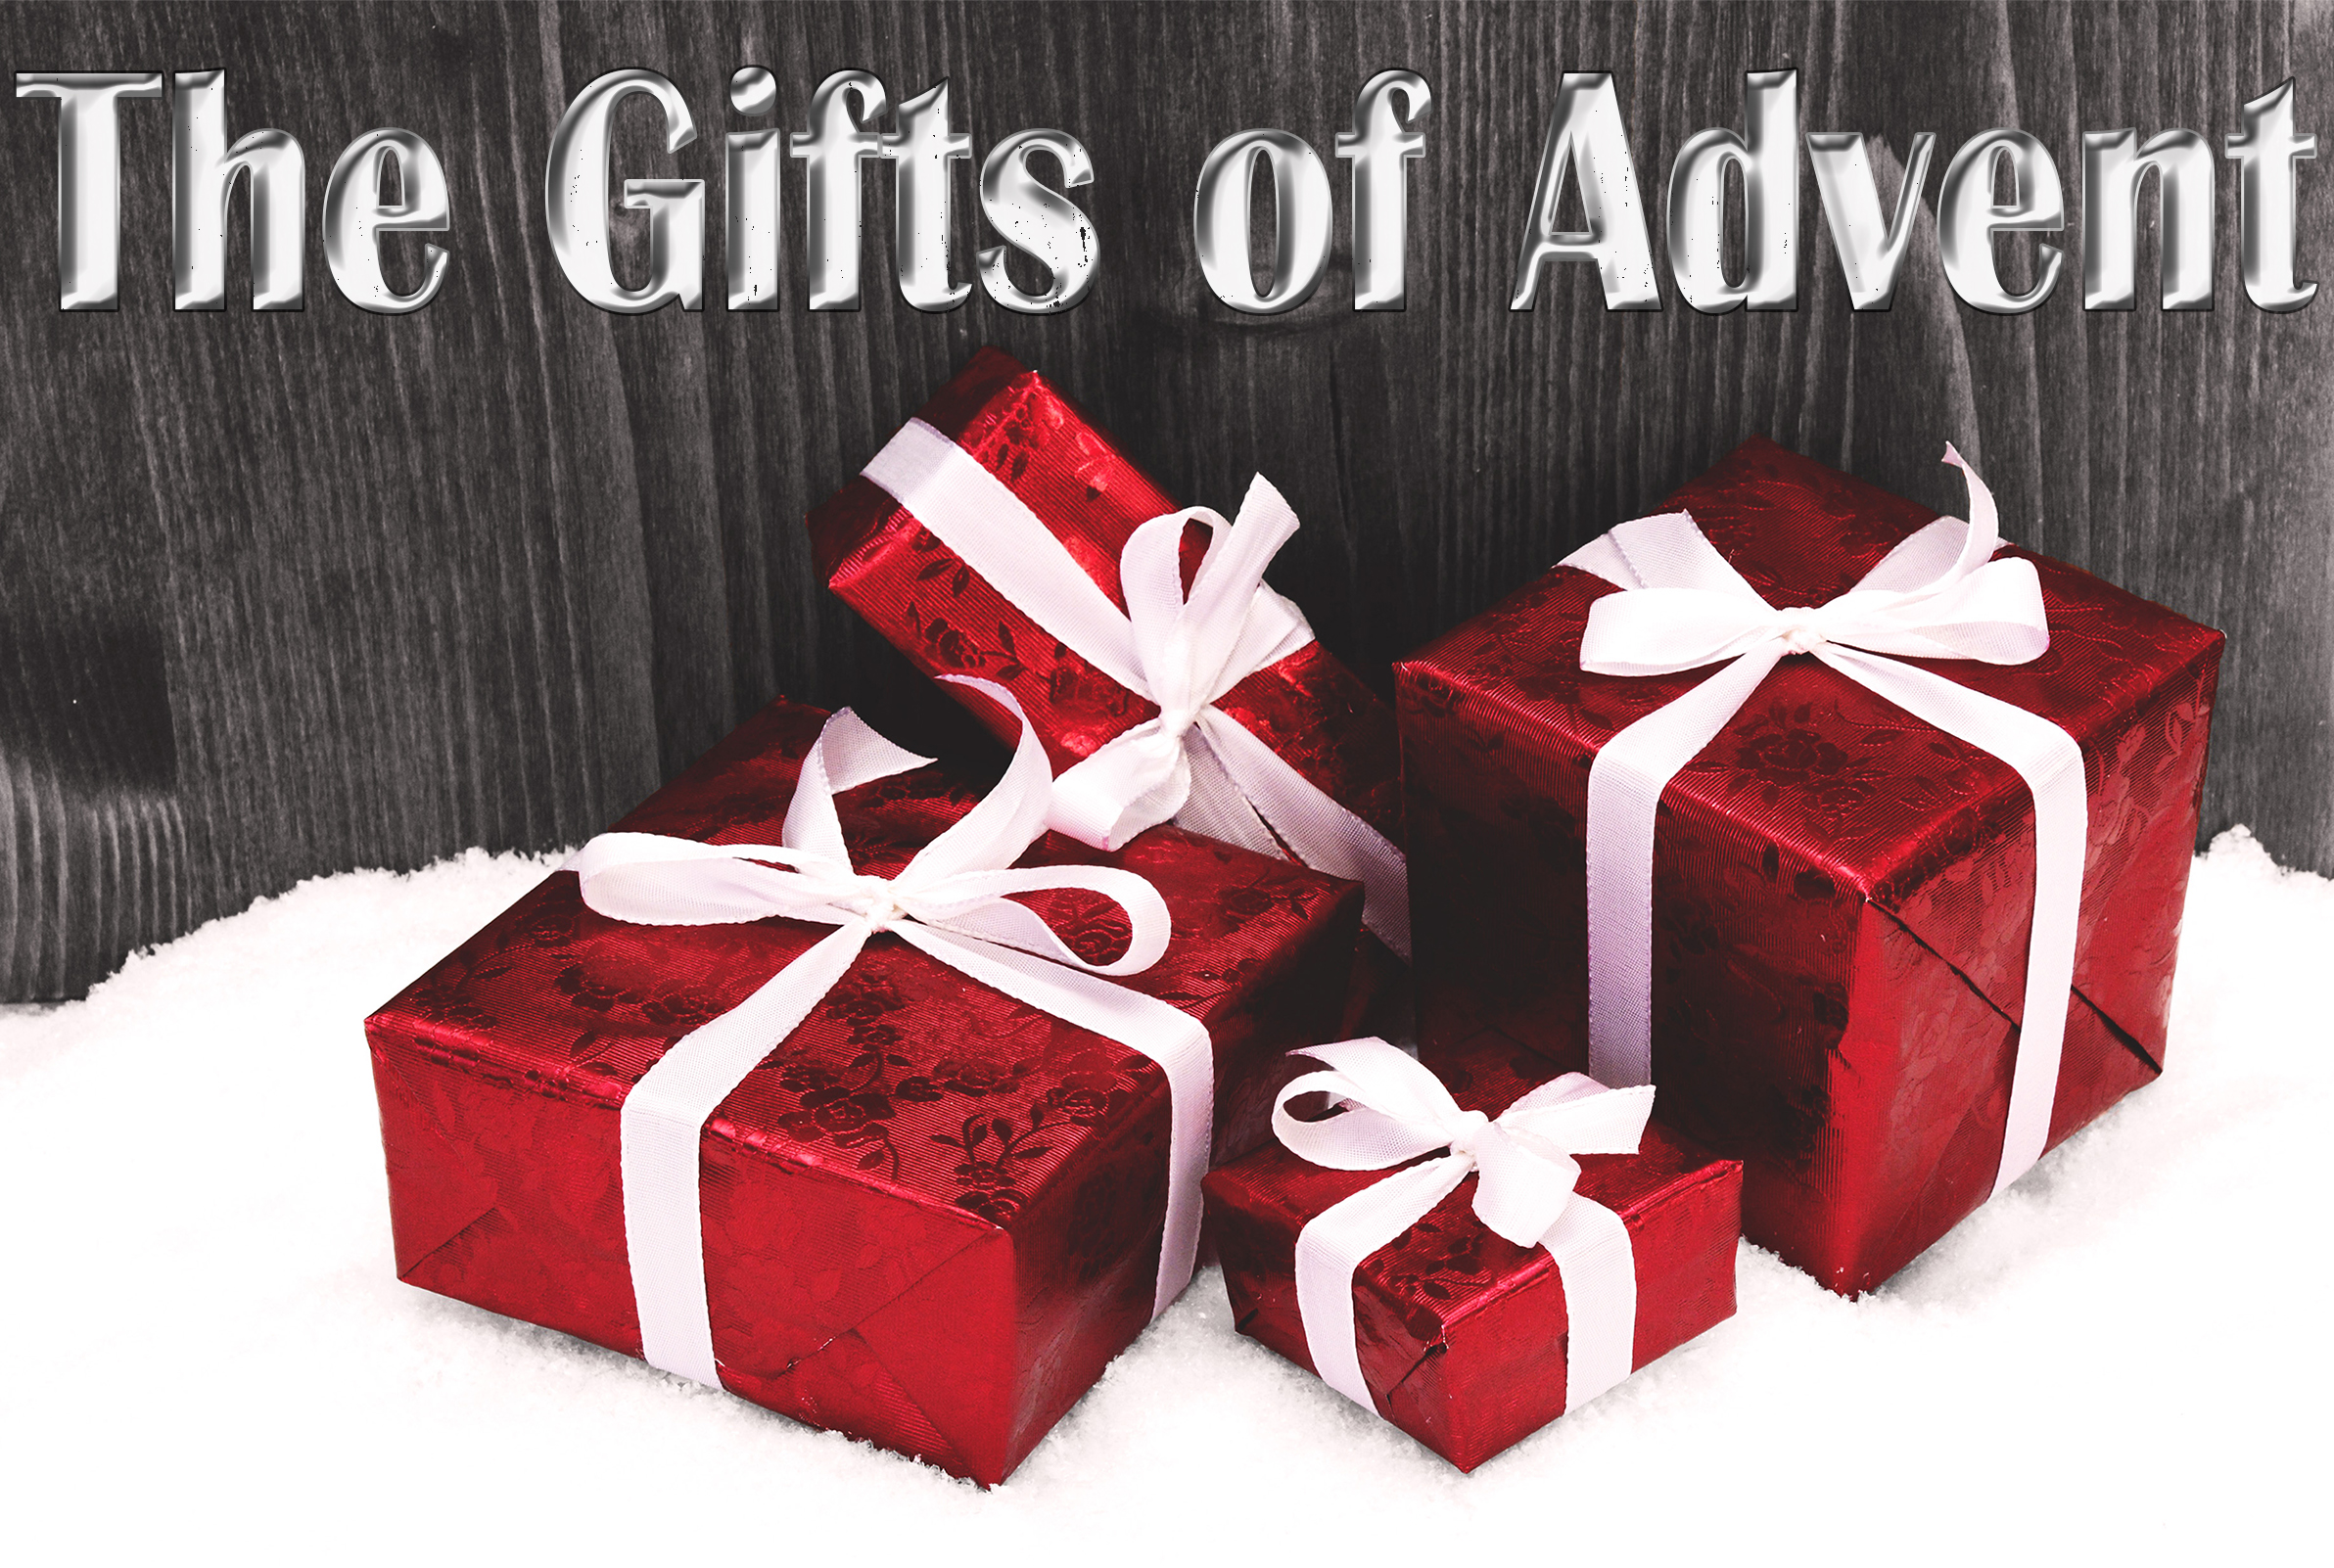 The Gifts of Advent banner